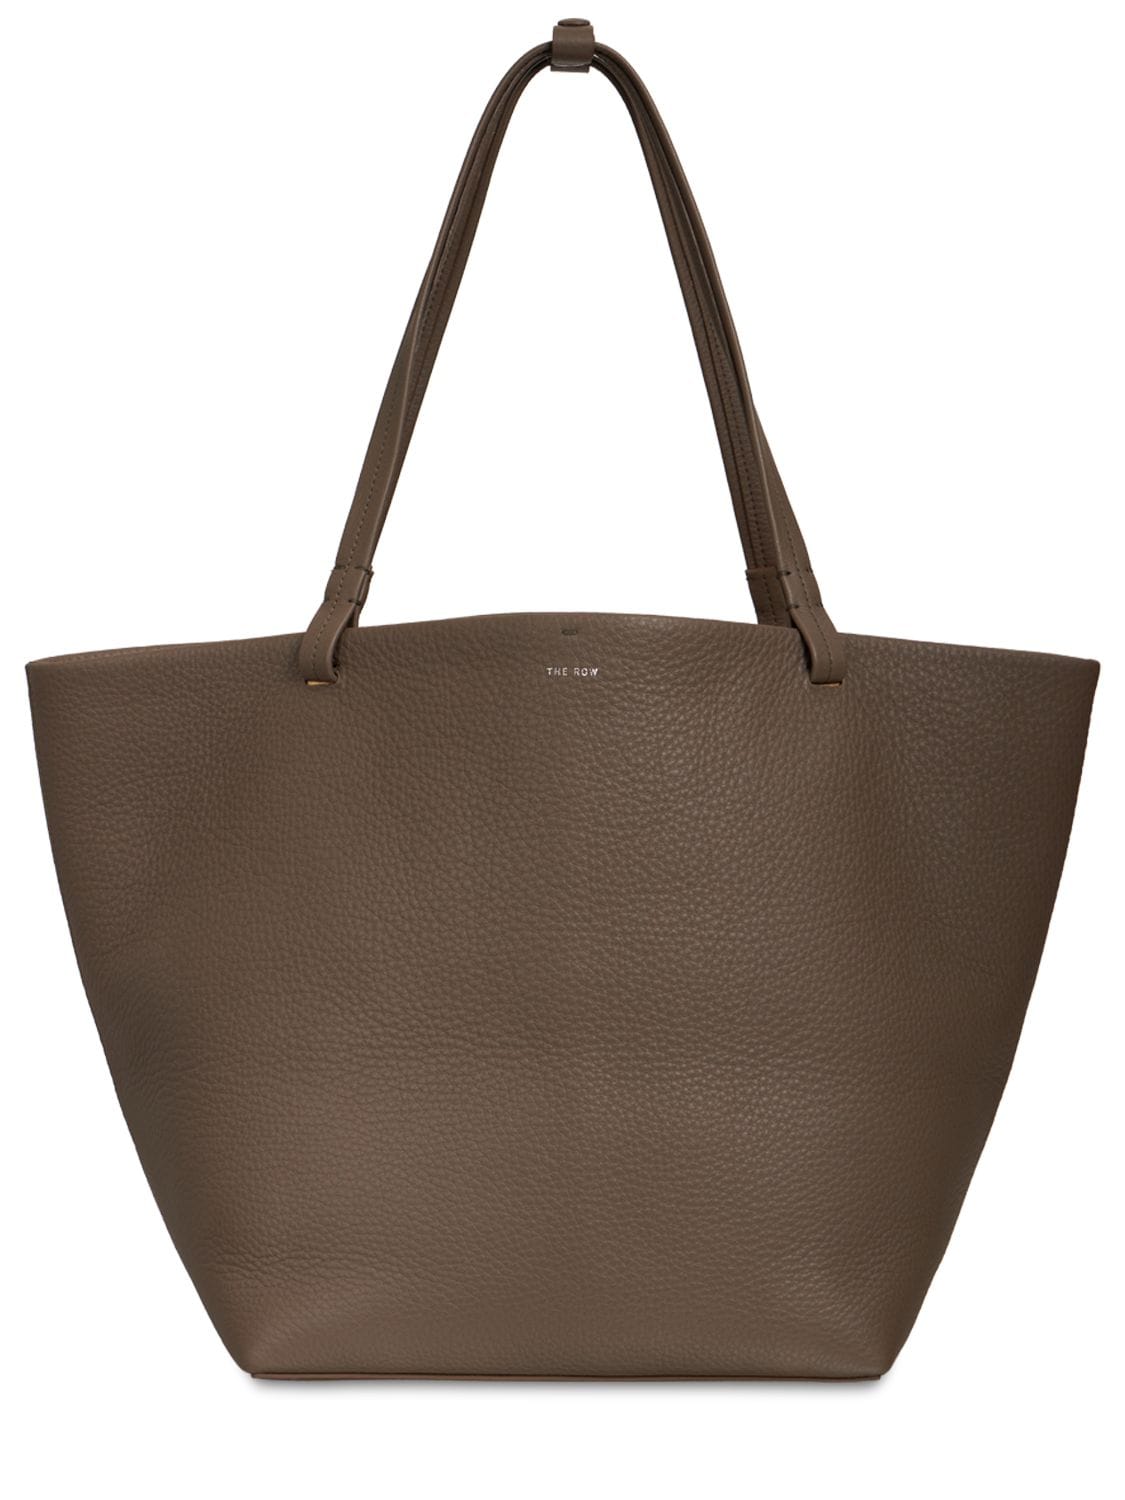 THE ROW PARK LEATHER TOTE BAG,74IJ52001-RUXQTEQ1